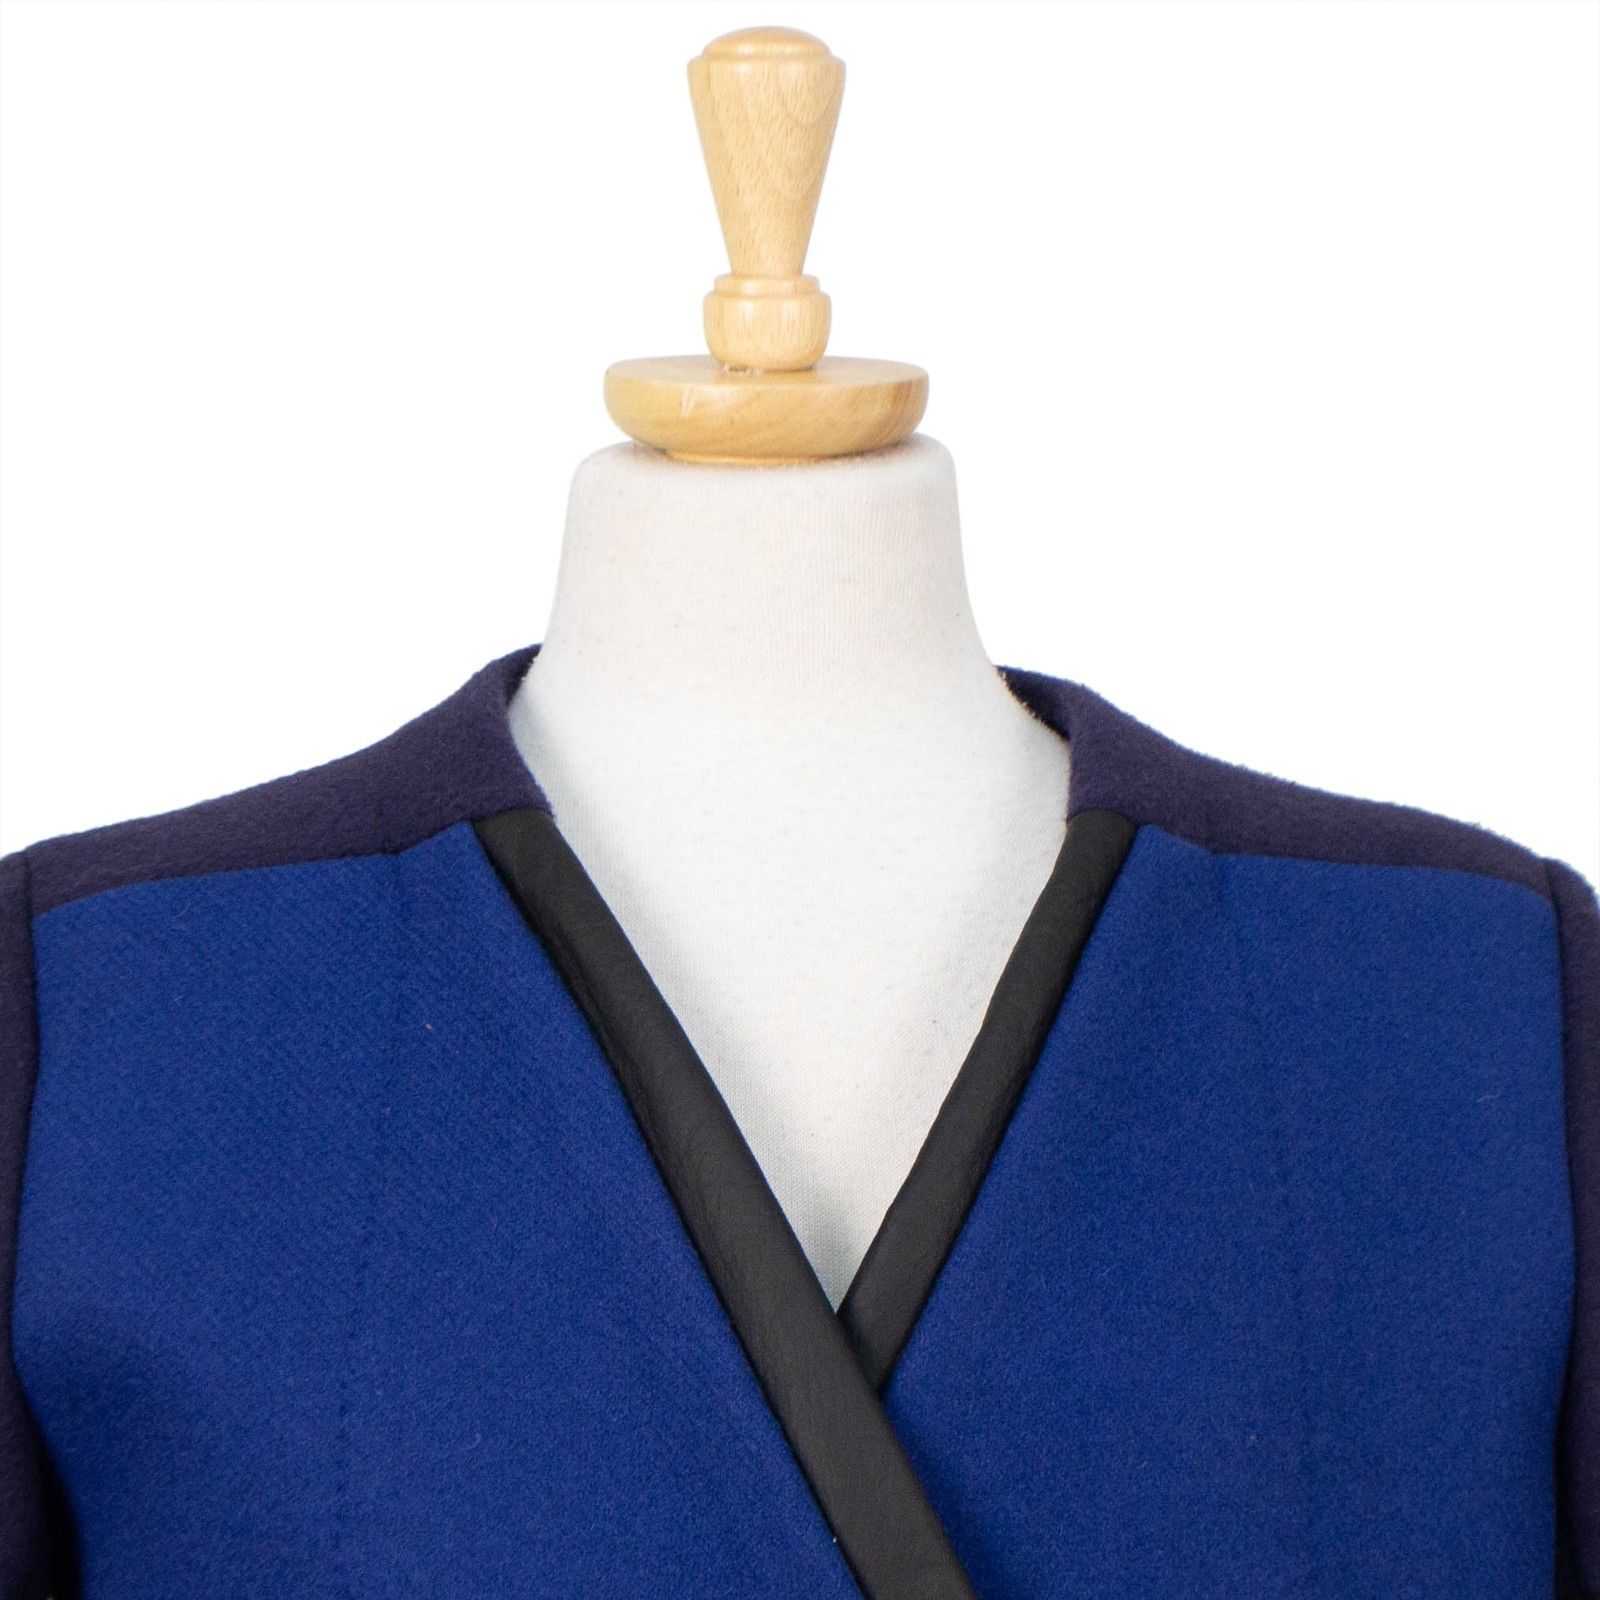 Nicholas Andreas Taraus Blue Contrast Panel Leather Lined Coat - Blue